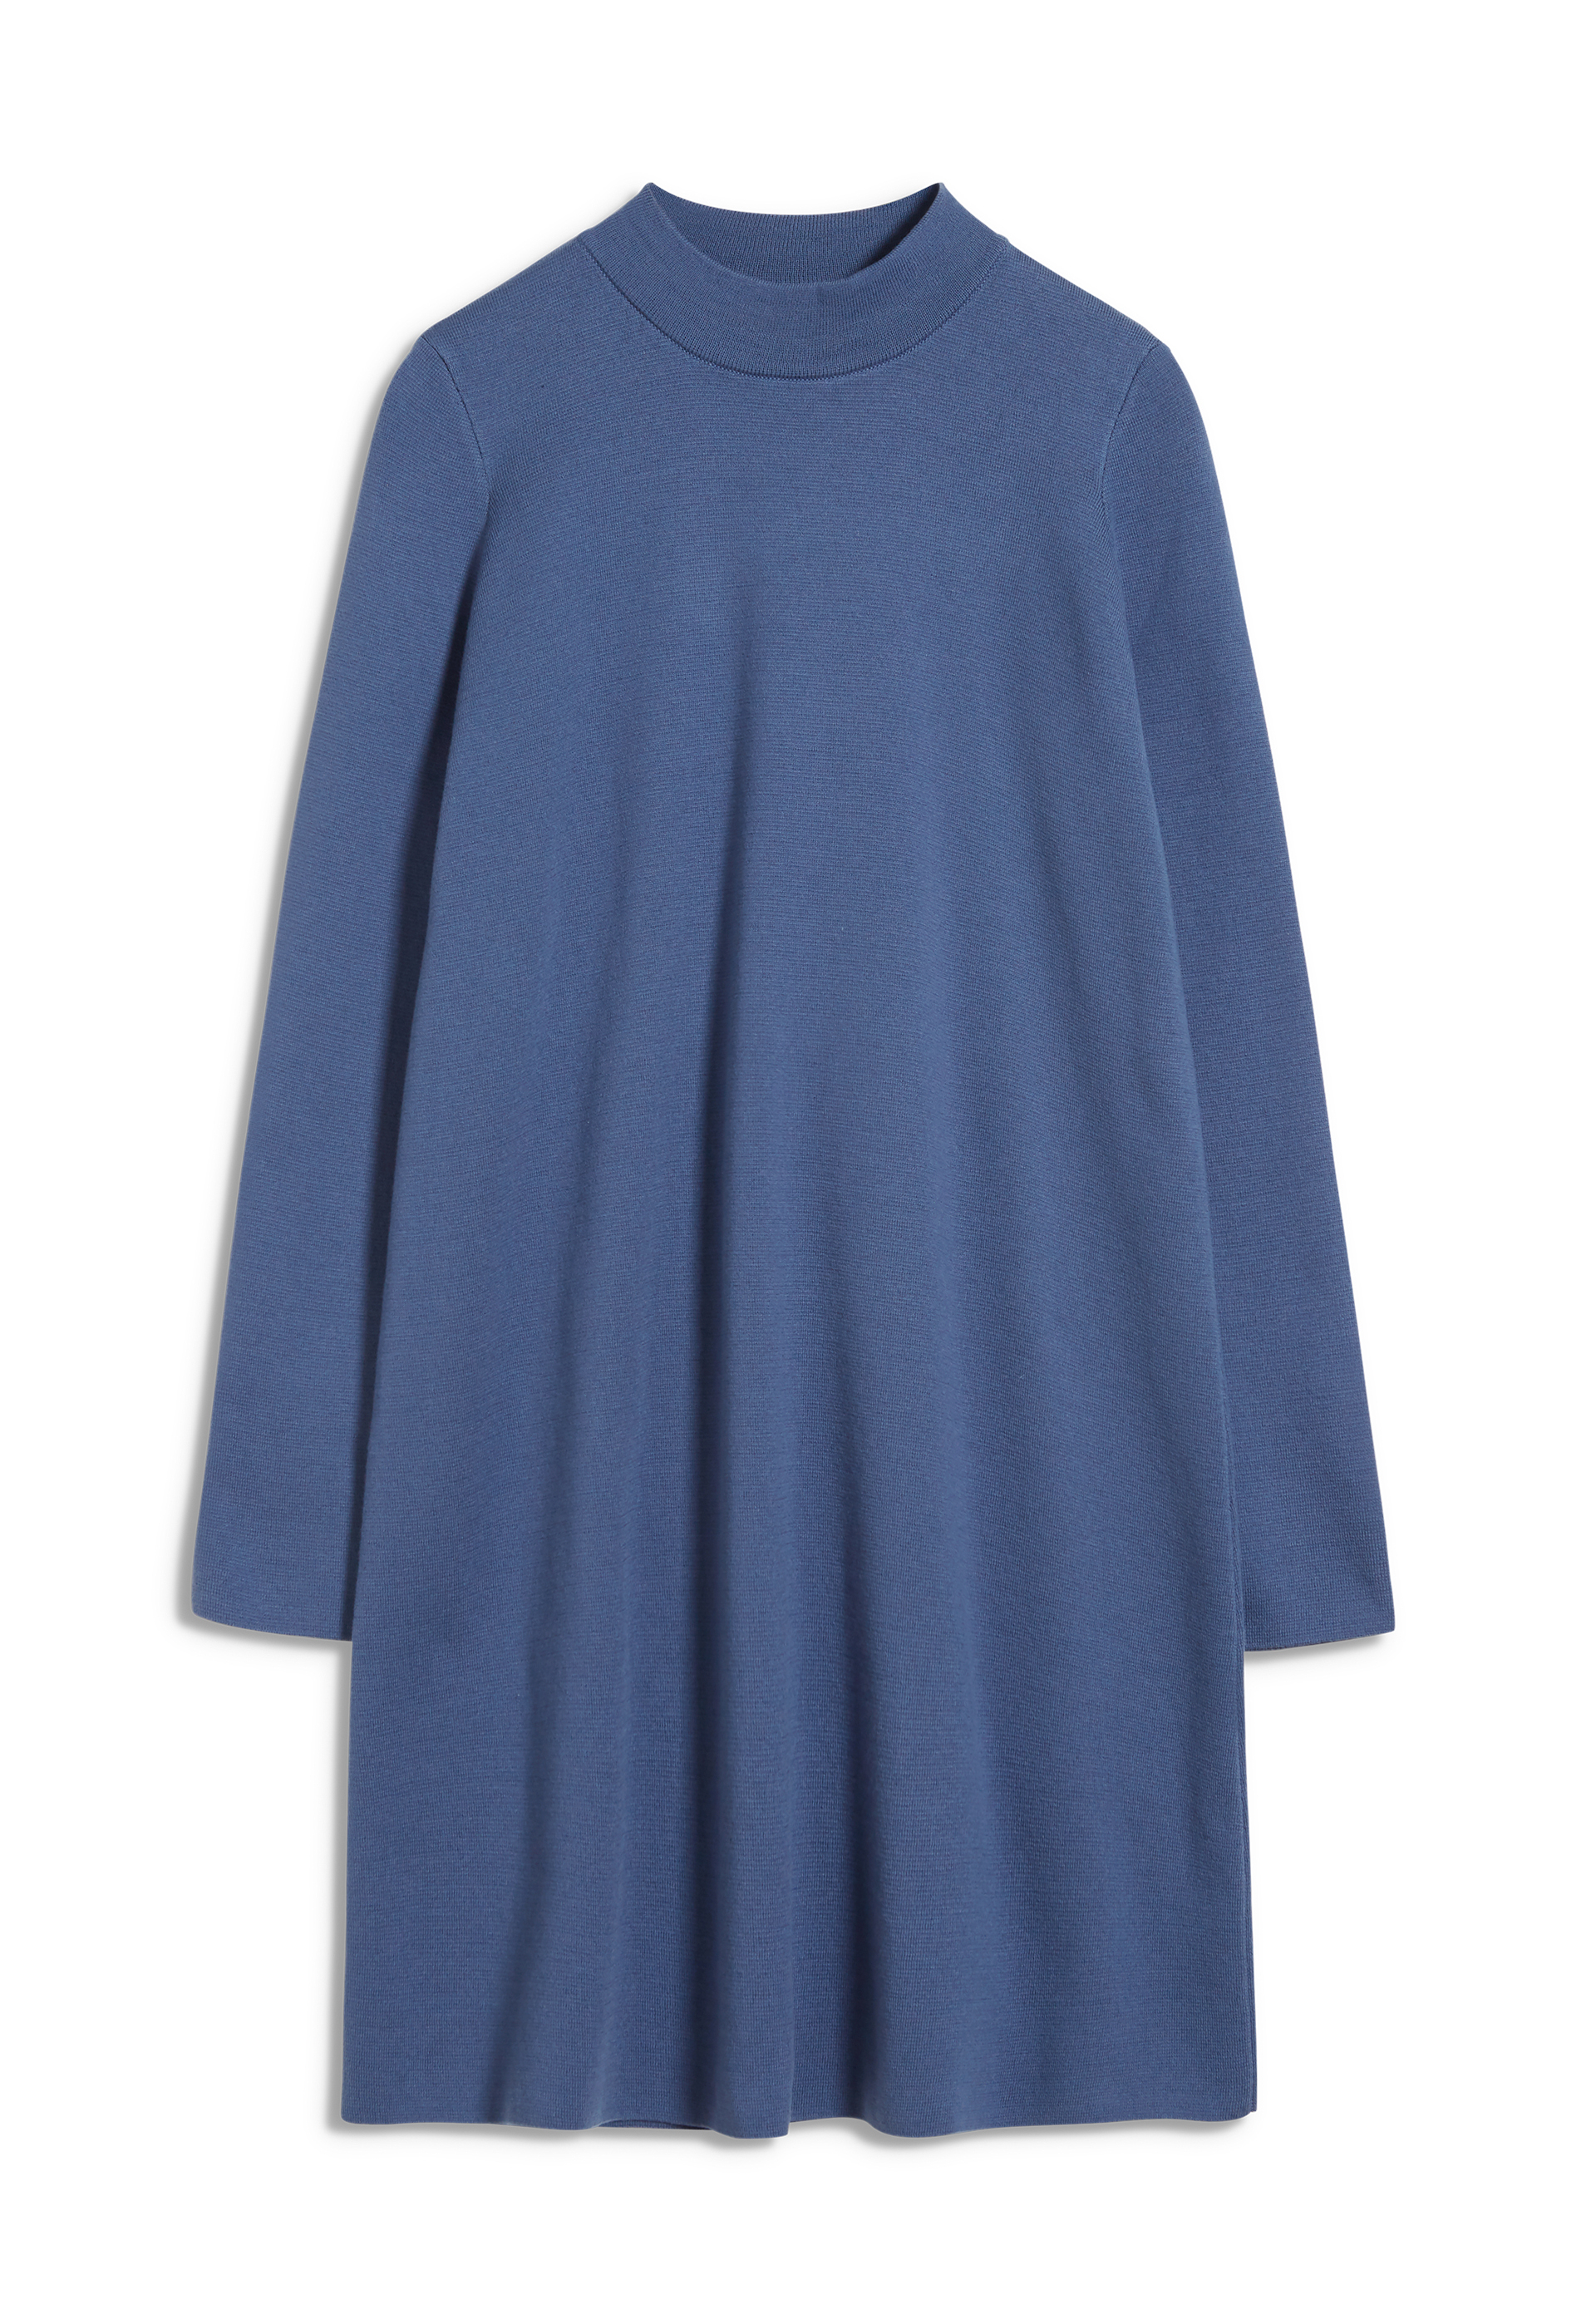 FRIADAA Knit Dress Loose Fit made of Organic Cotton